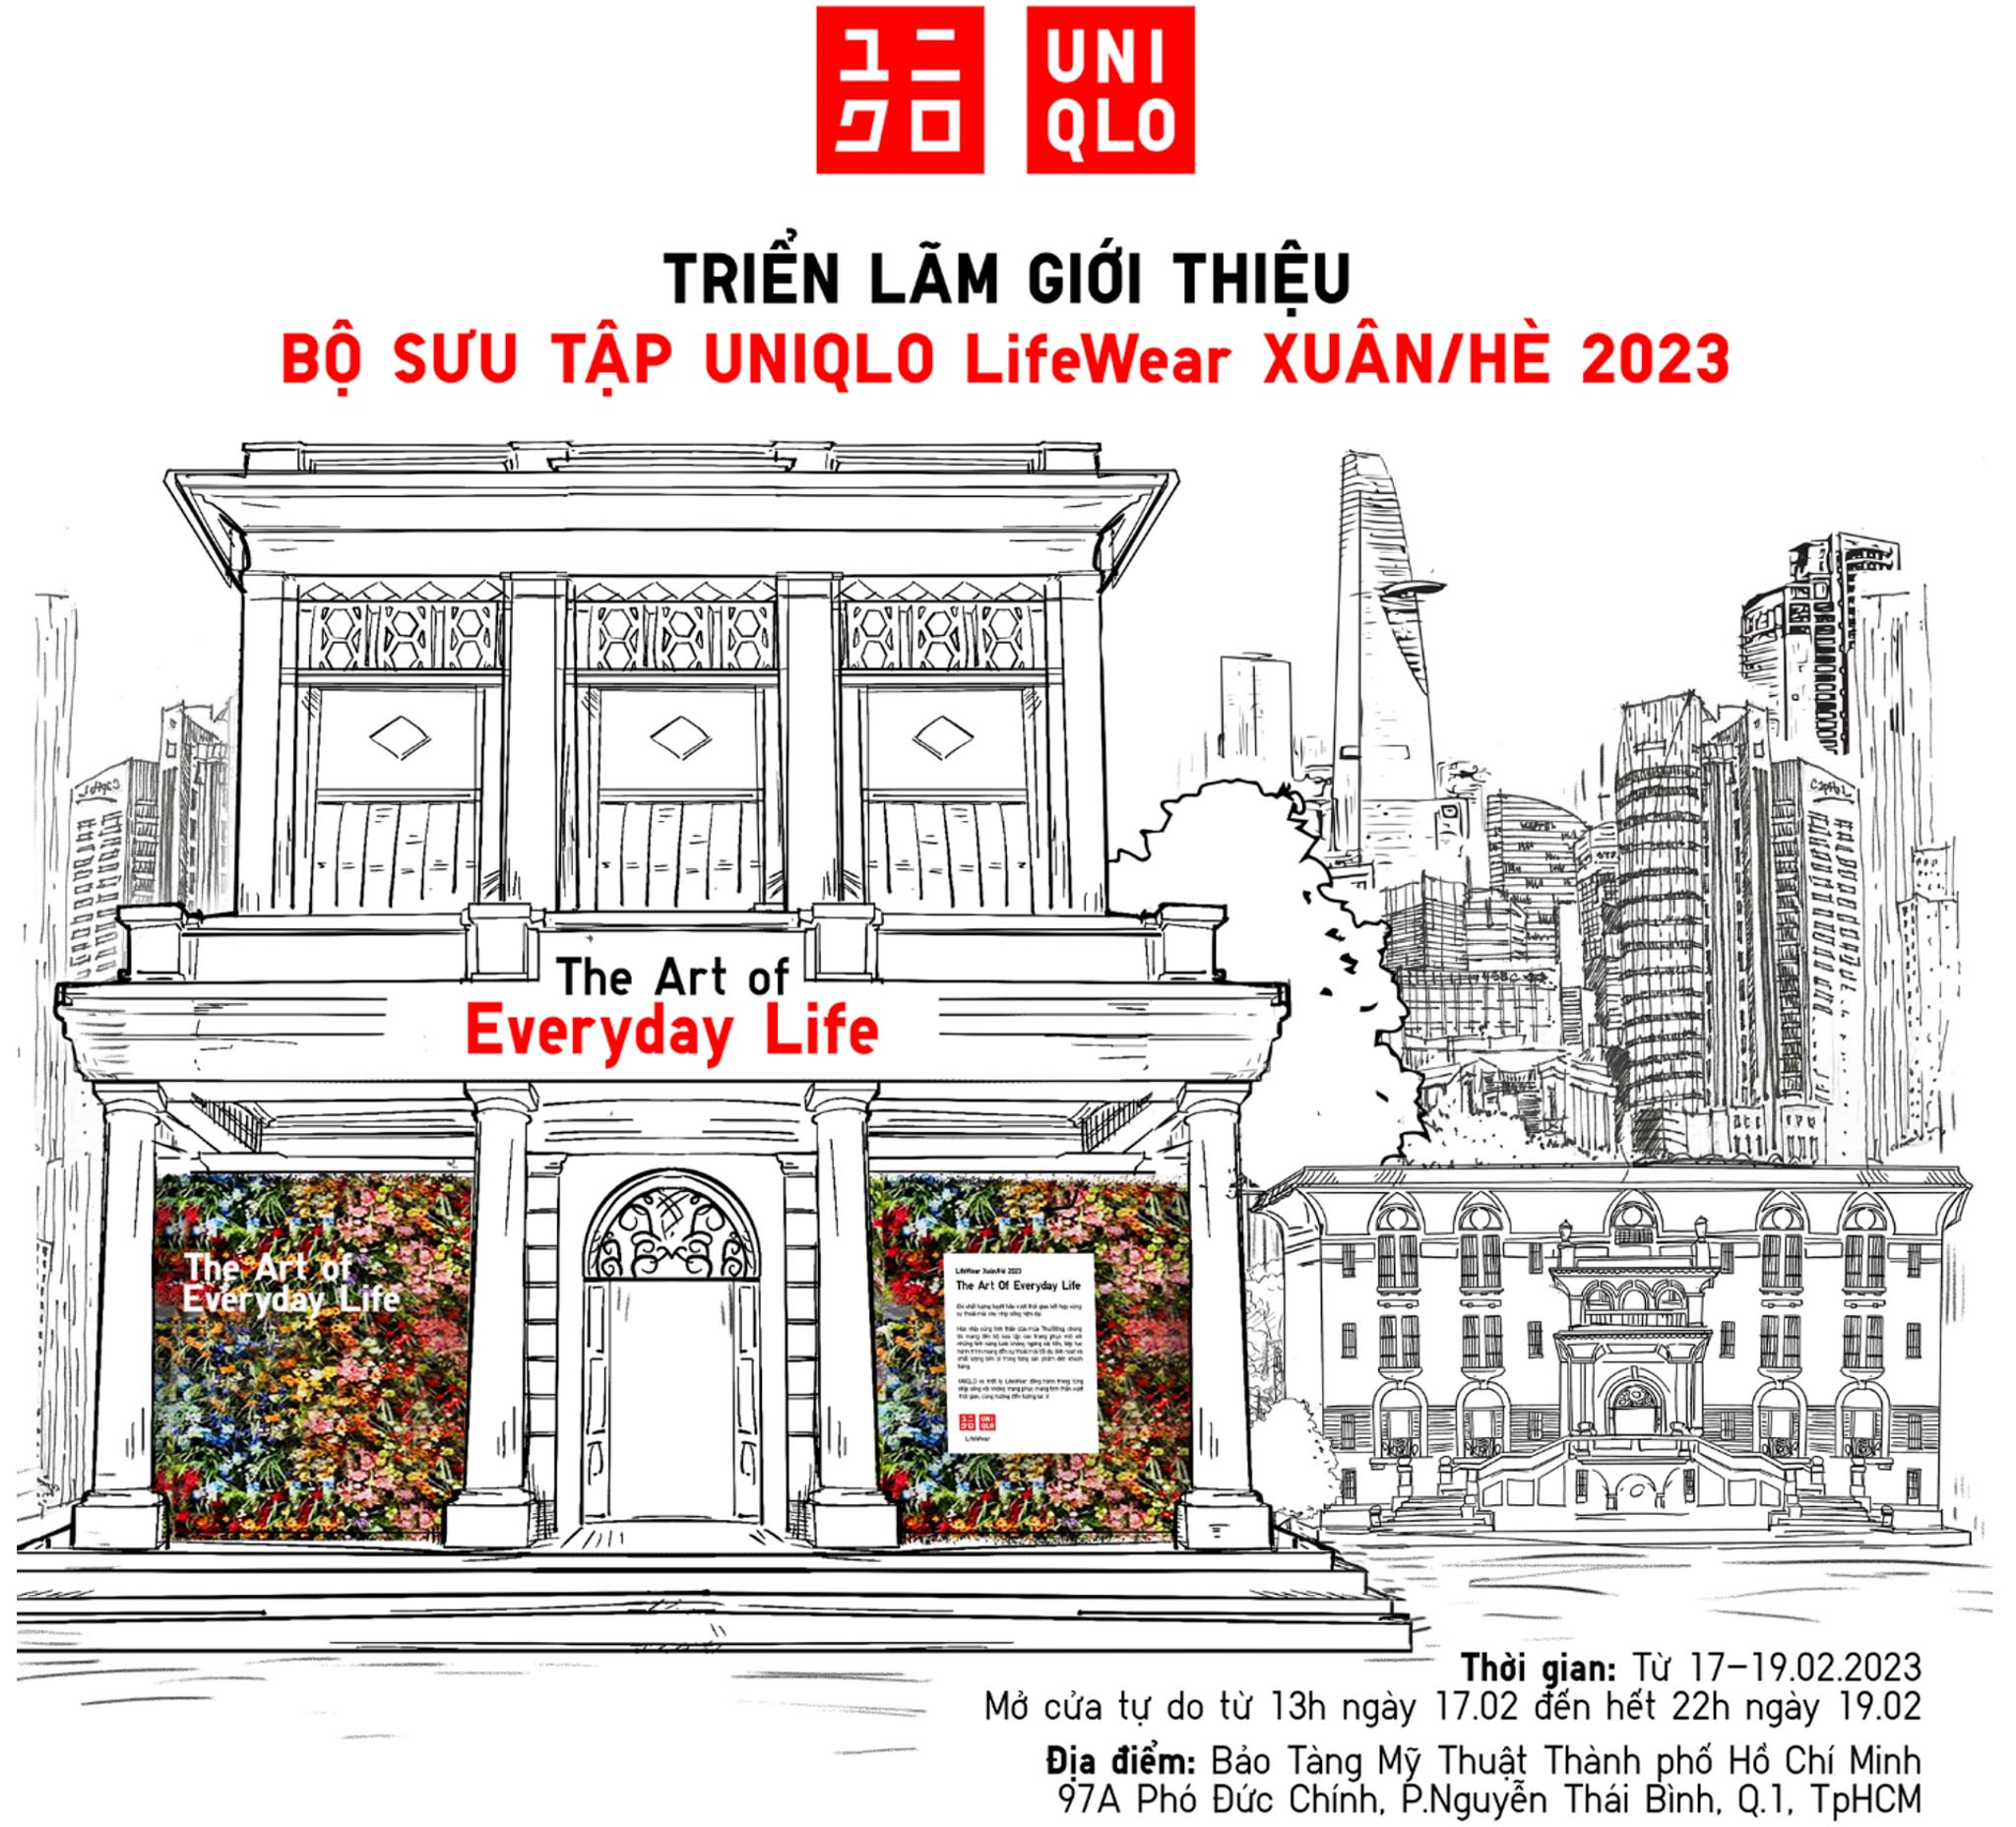 UNIQLO to launch first Vietnam store in downtown Ho Chi Minh City this year